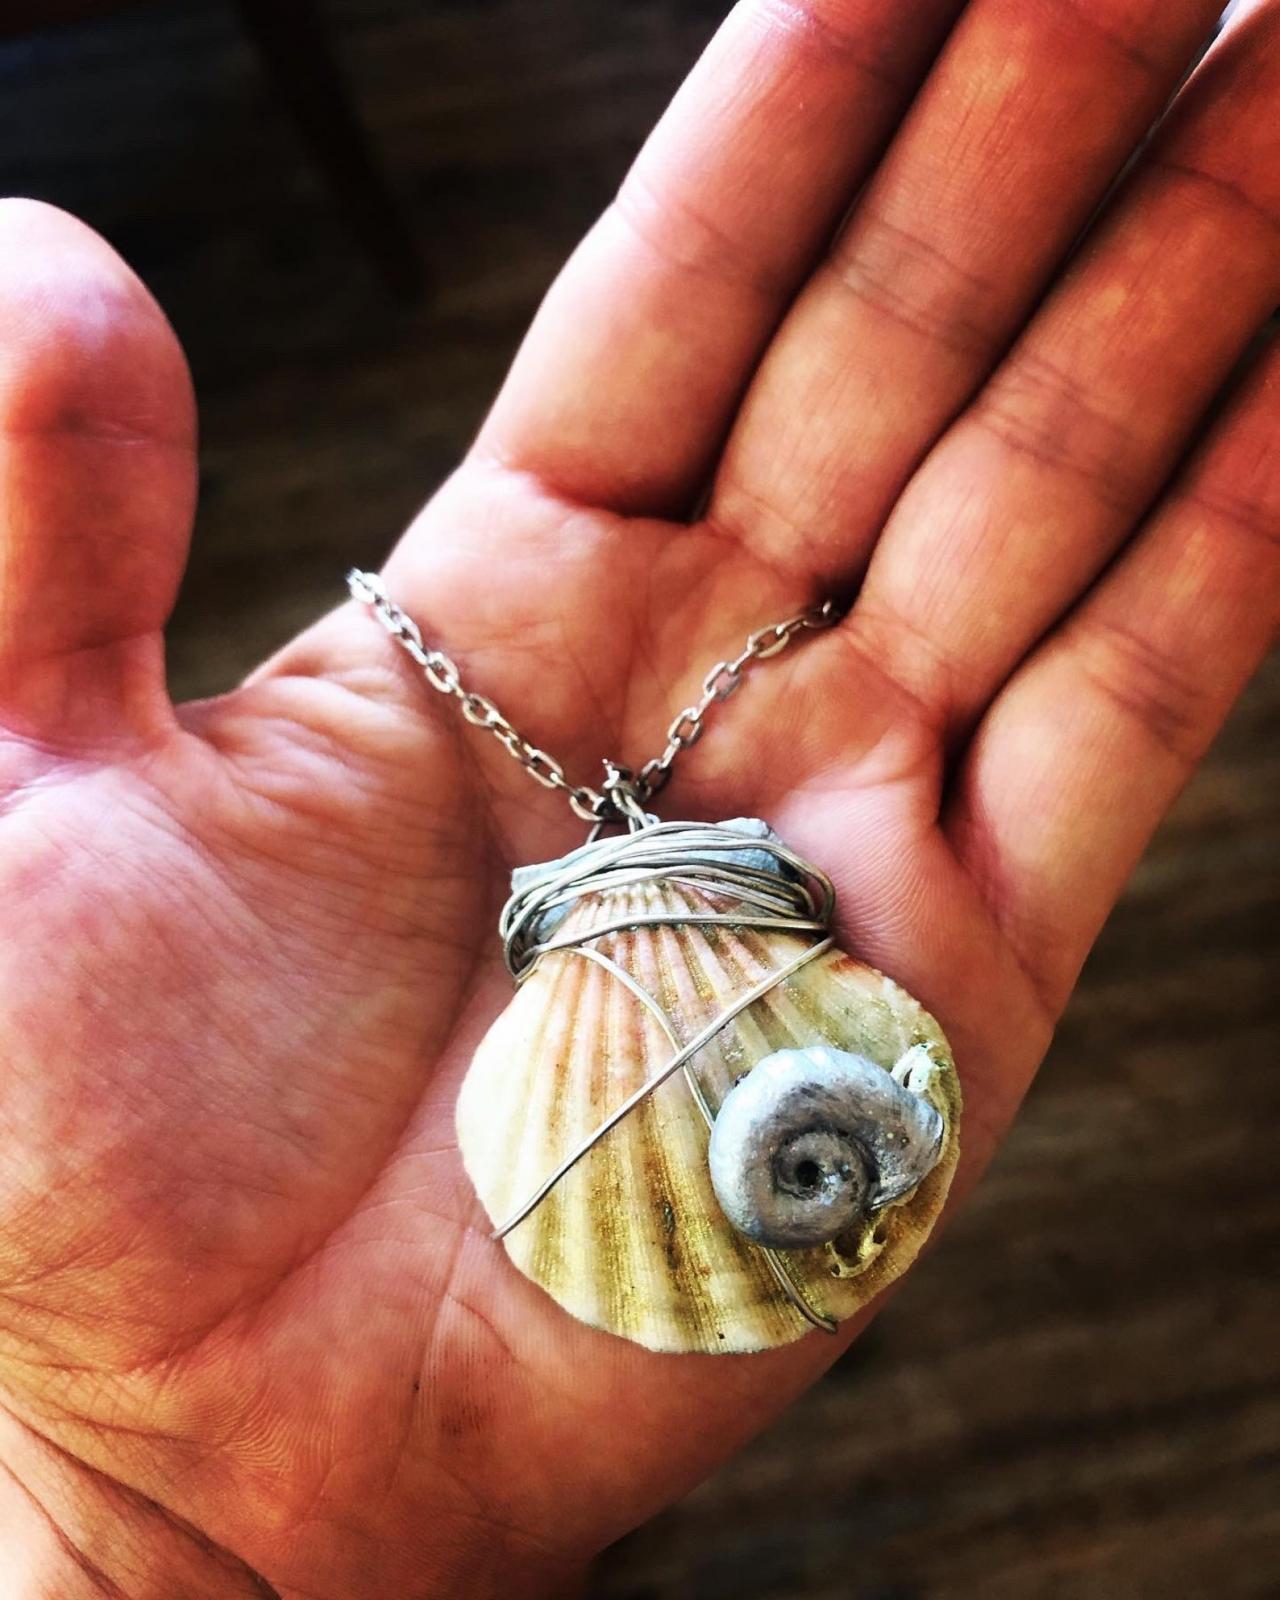 Wrapped Mermaid Snail Shell Painted Pendent Necklace Seashell Necklace Necklace Mermaid Shell Necklace Pendant Necklace Gift For Her